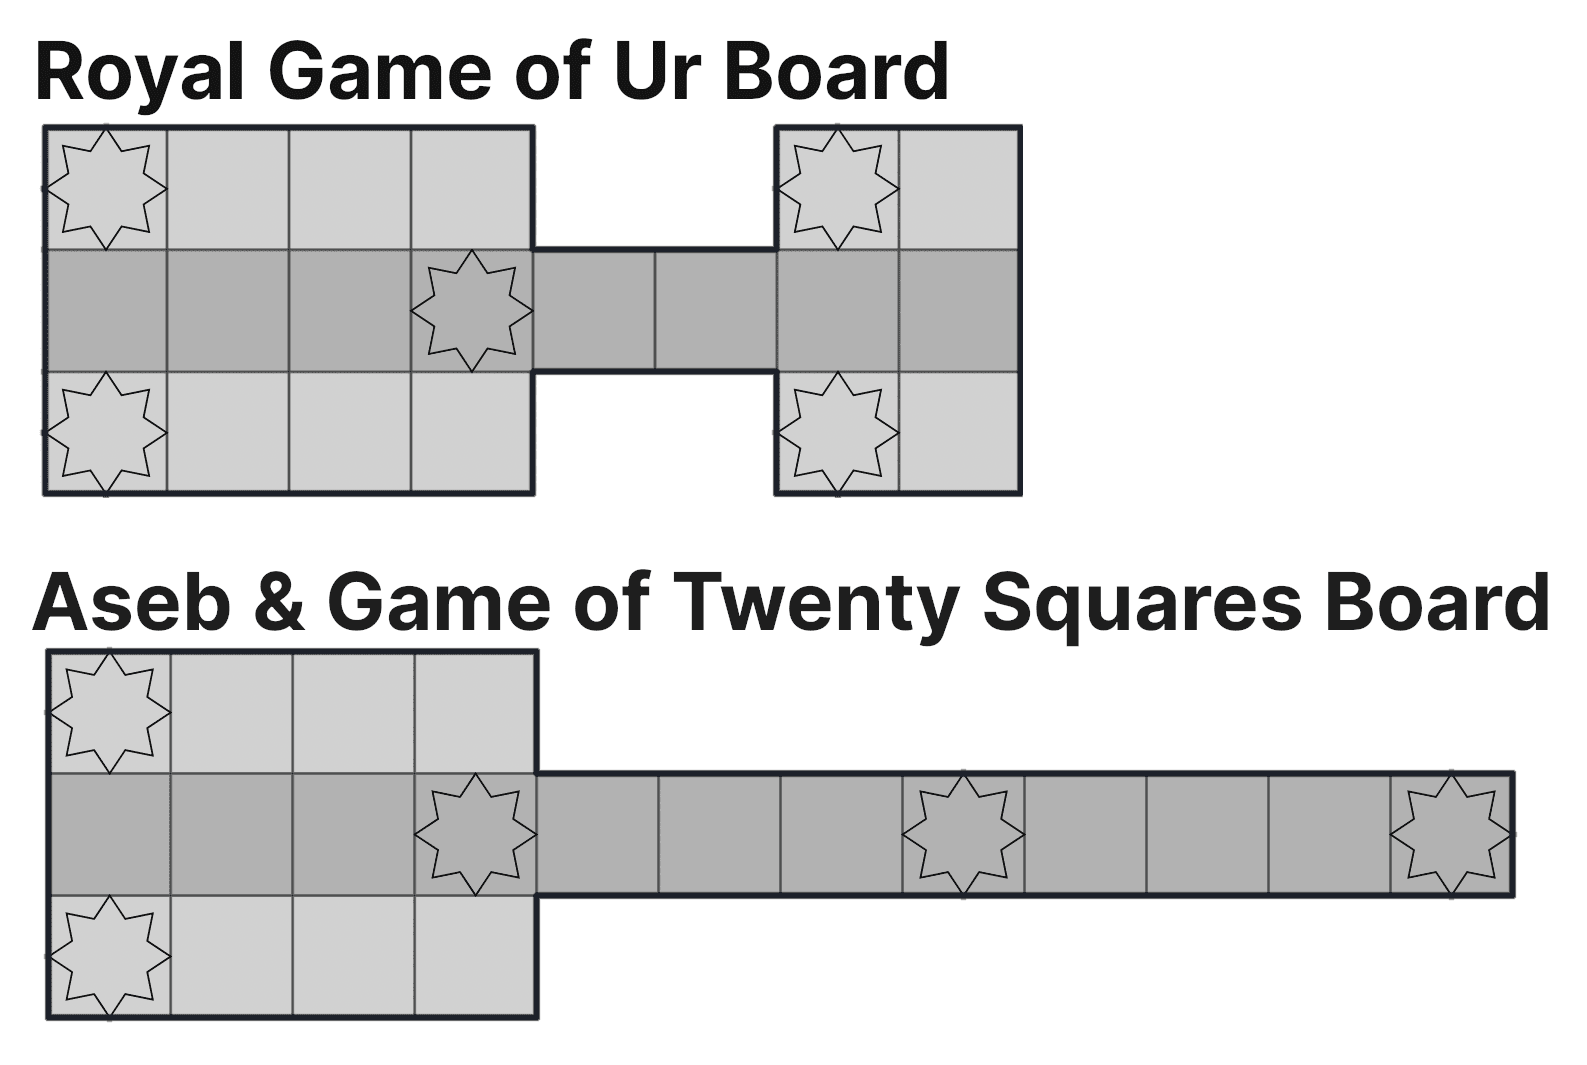 Comparison of the shape of Royal Game of Ur boards and Game of Twenty Square boards.